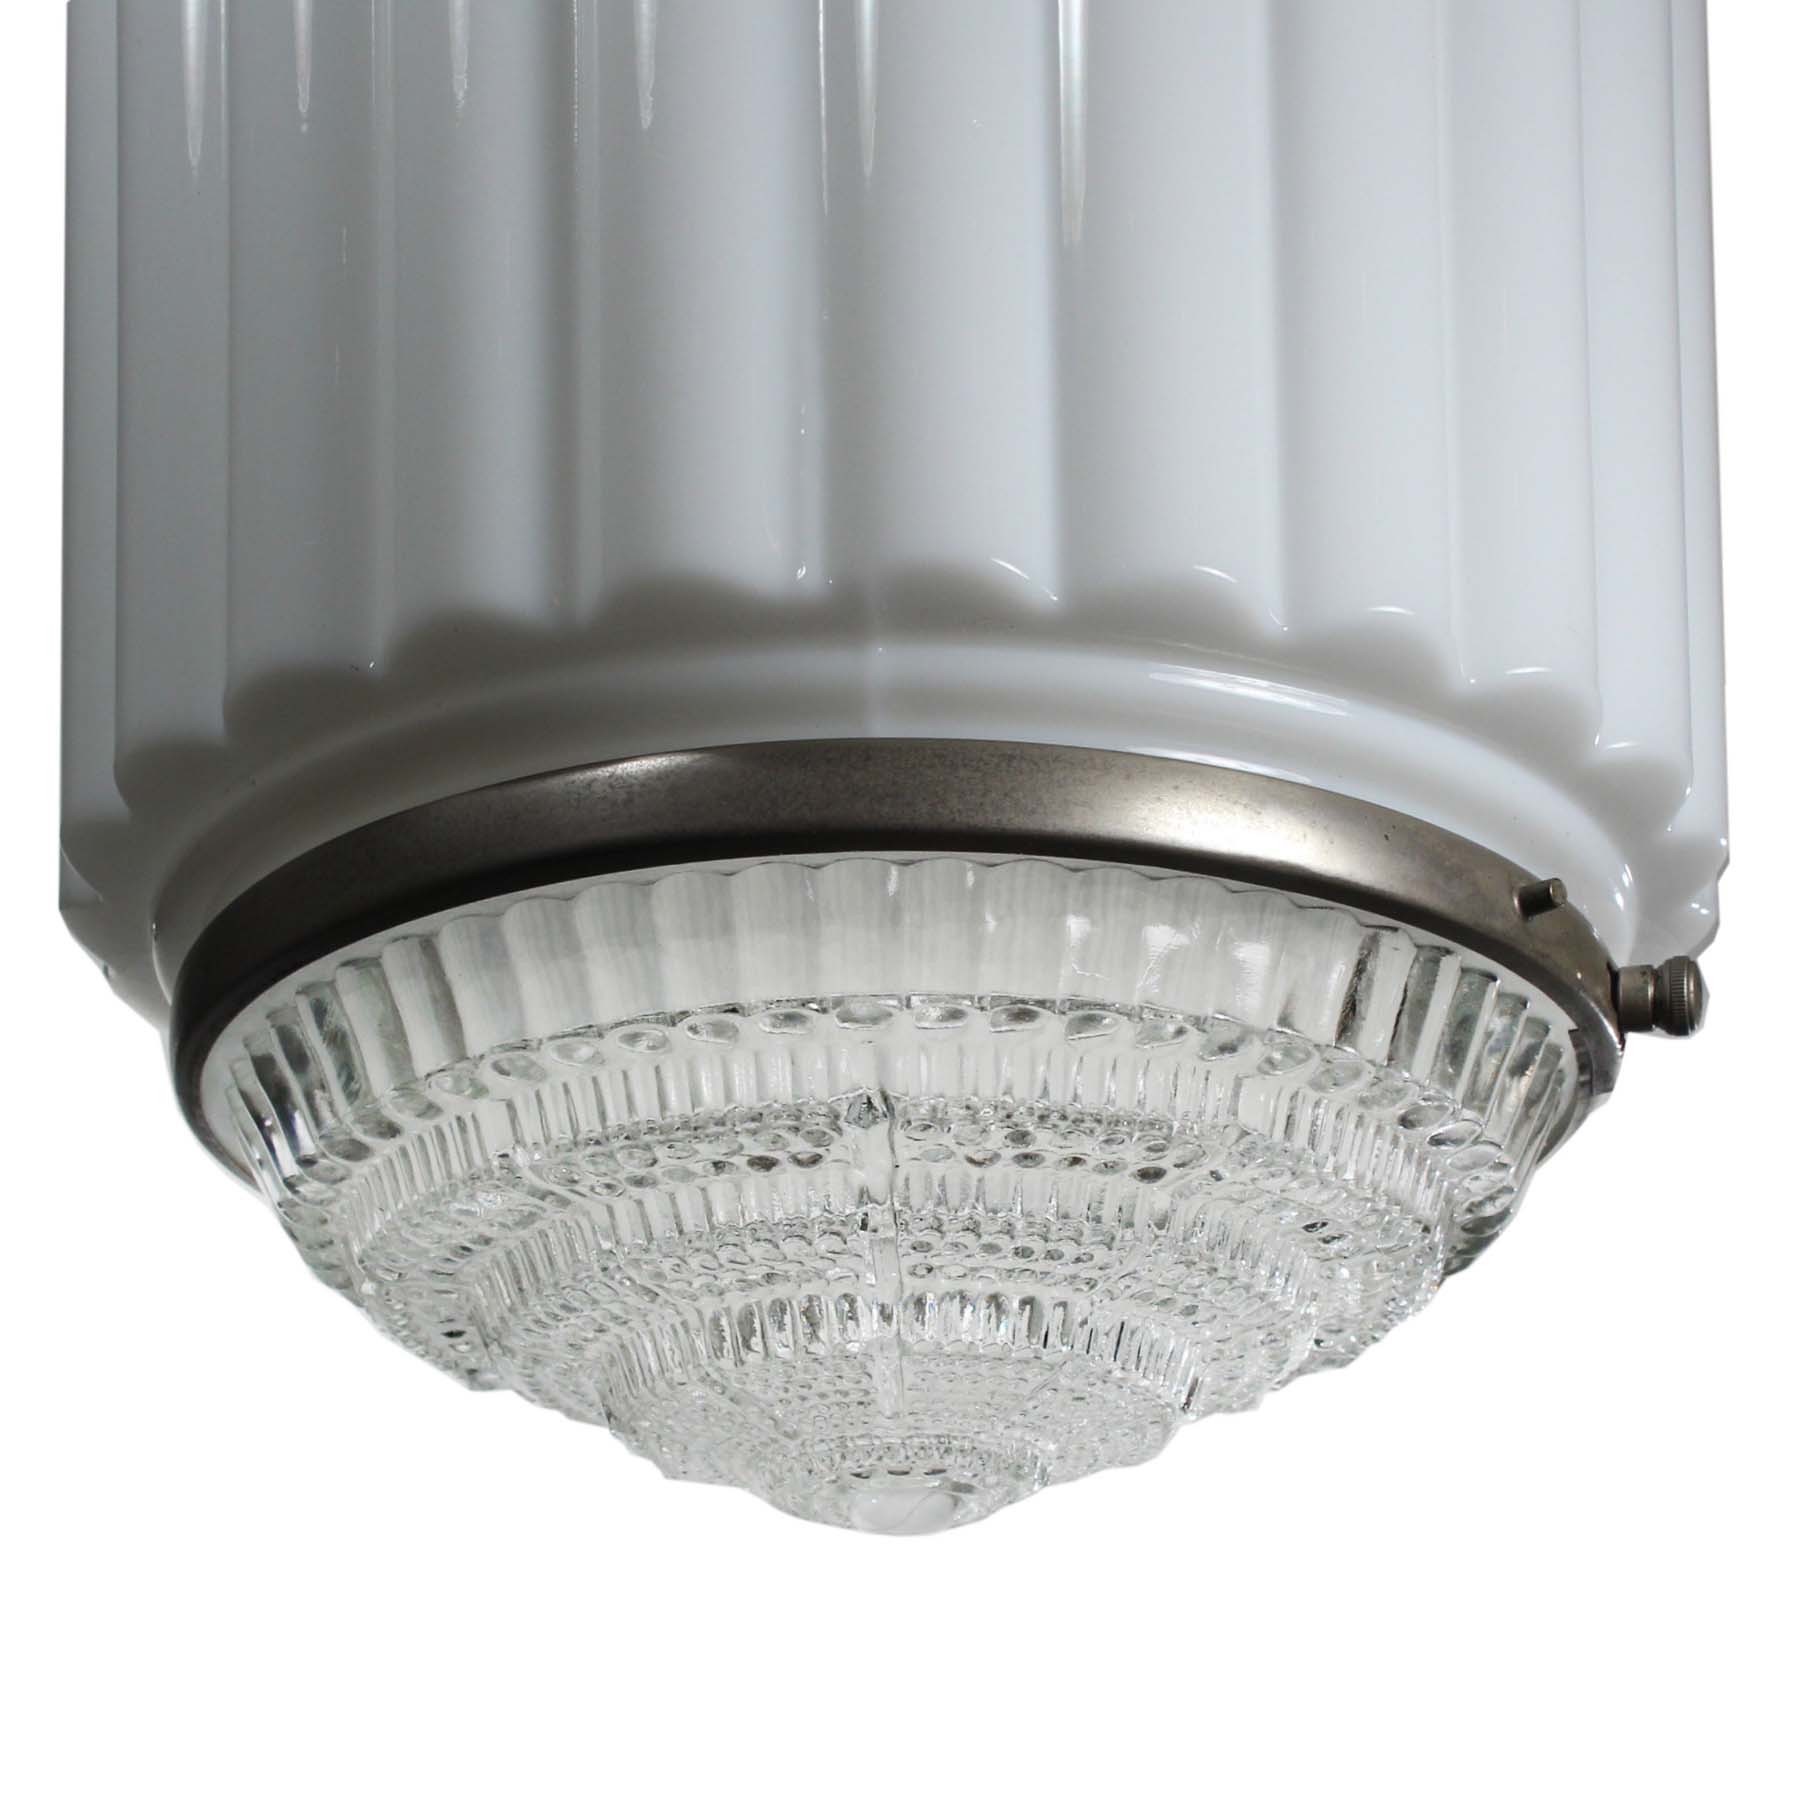 SOLD Art Deco Skyscraper Pendant Light with Two-Part Prismatic Shade, Antique Lighting-70525